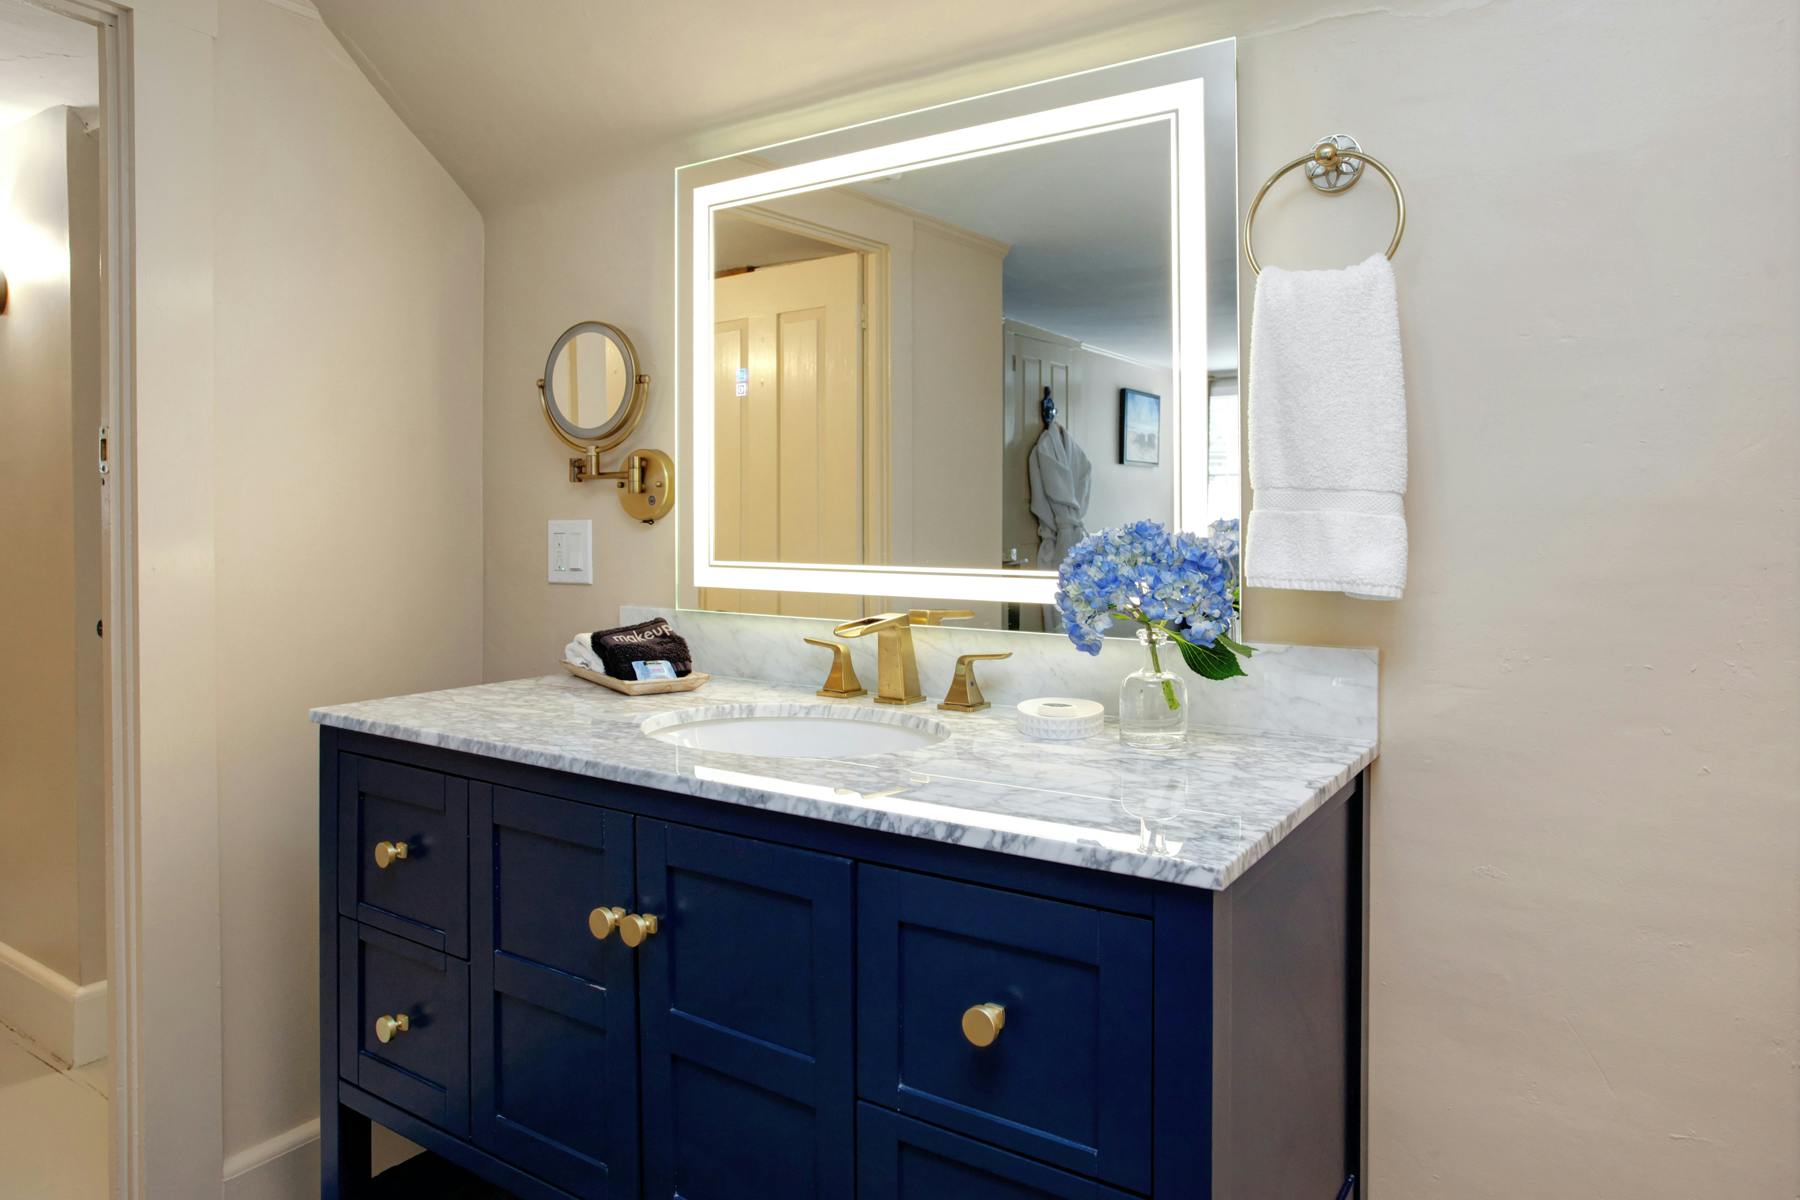 Wooden navy colored bathroom vanity with white top and gold fixtures, mirror above